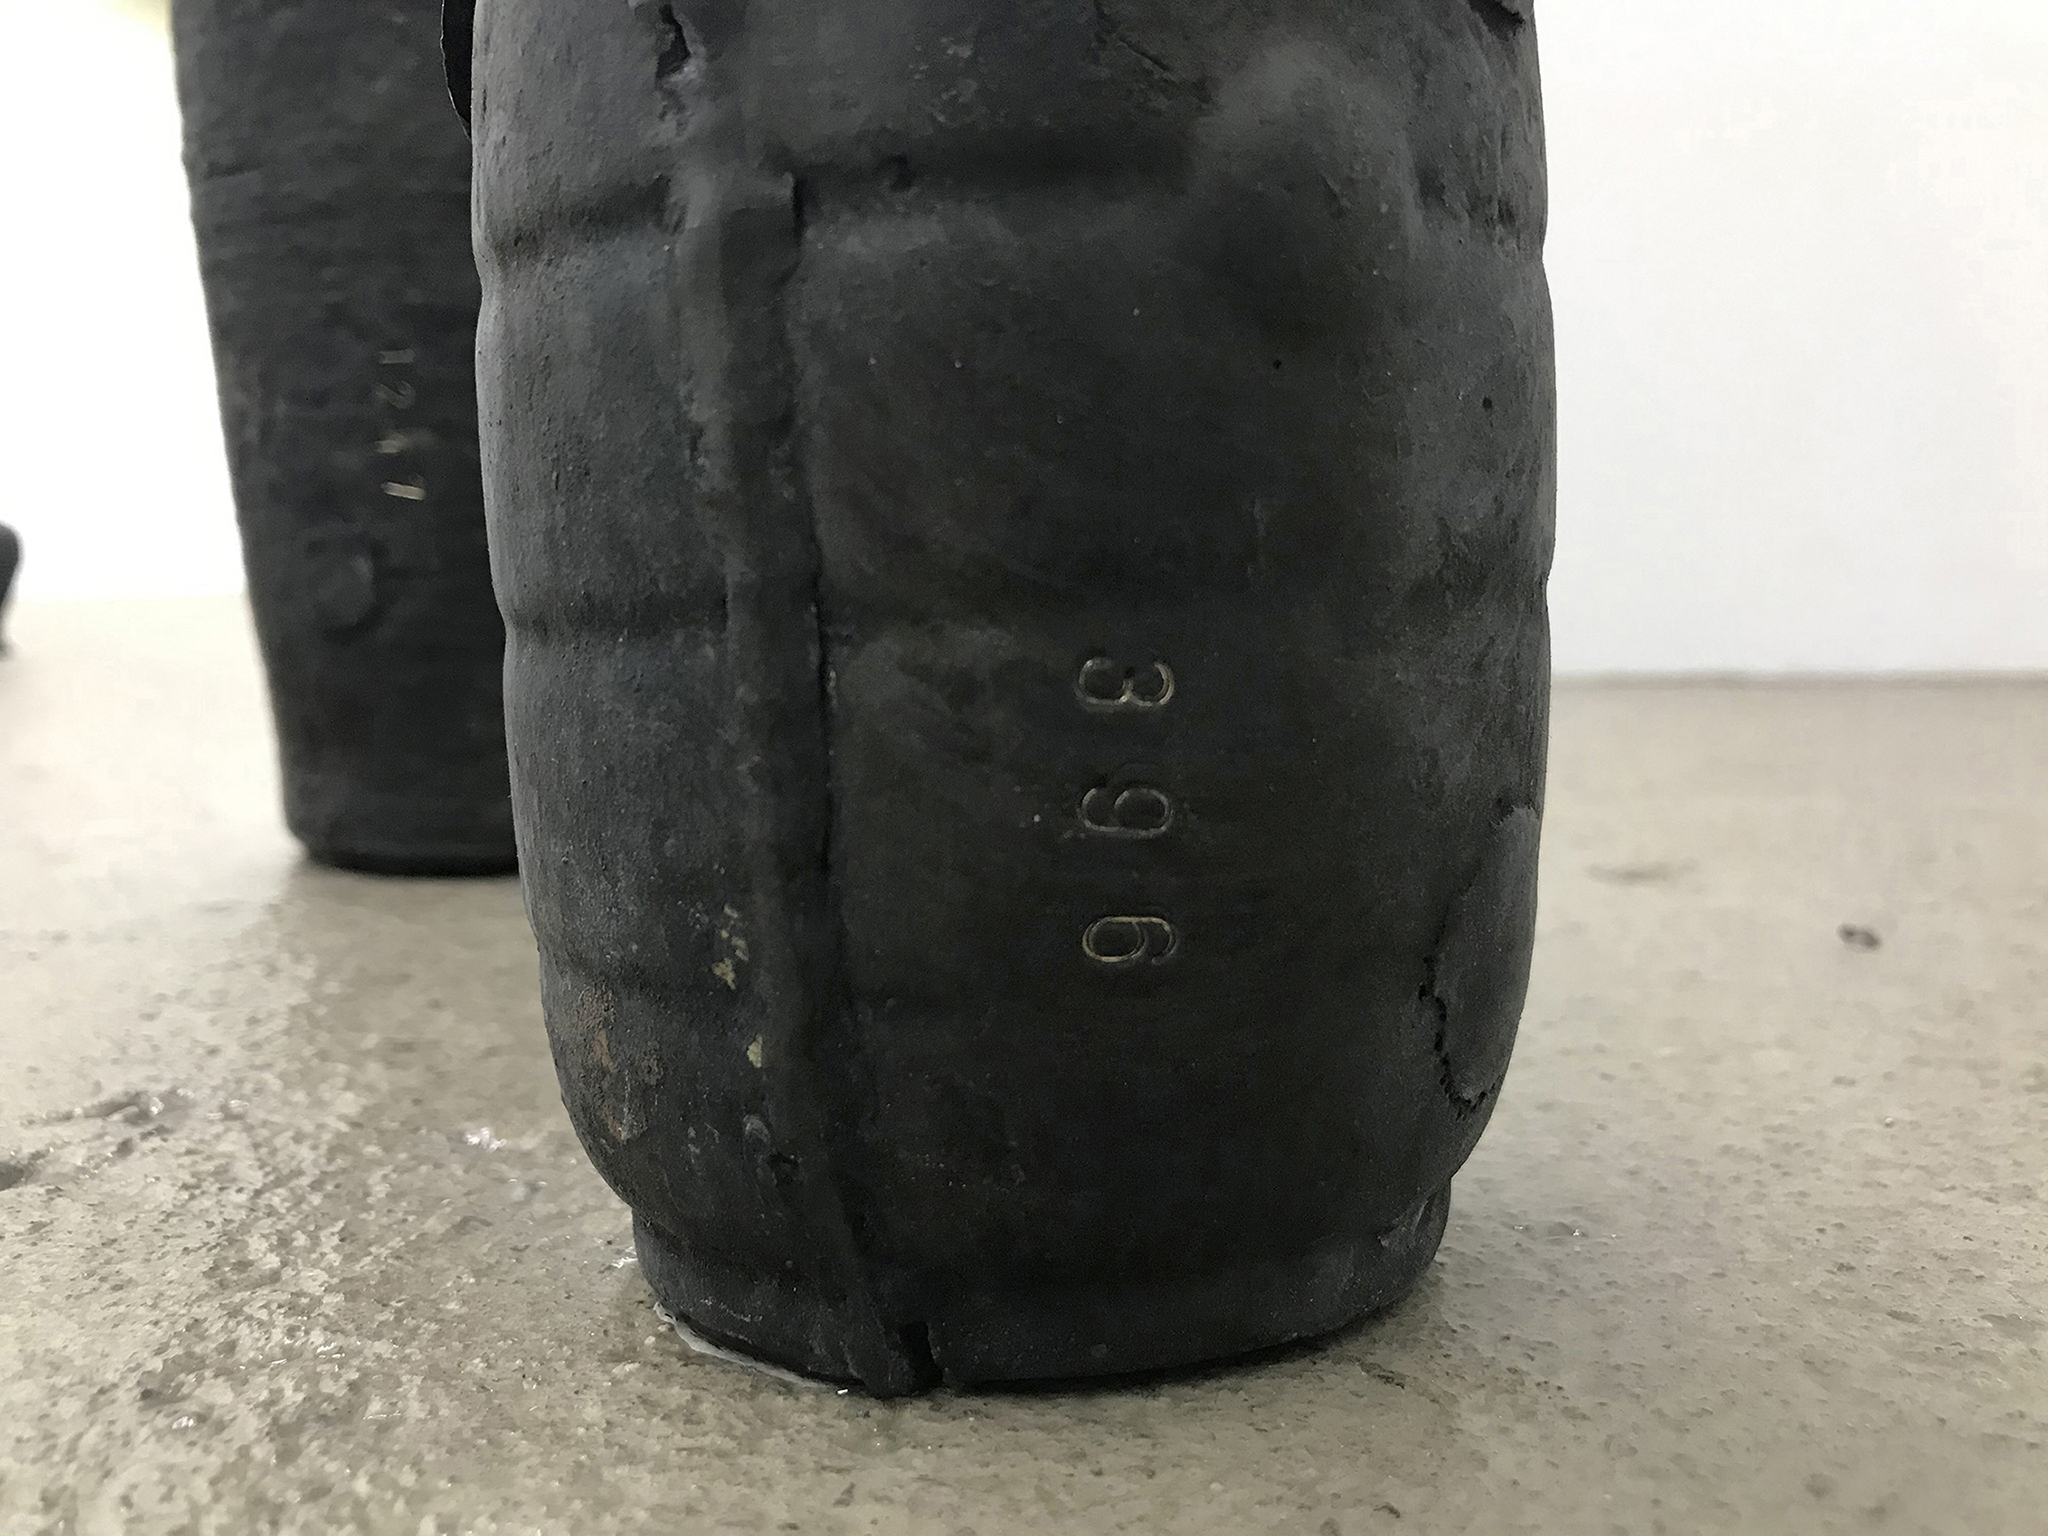 Urn detail, stamped with the number of AR-15 casings used in its casting